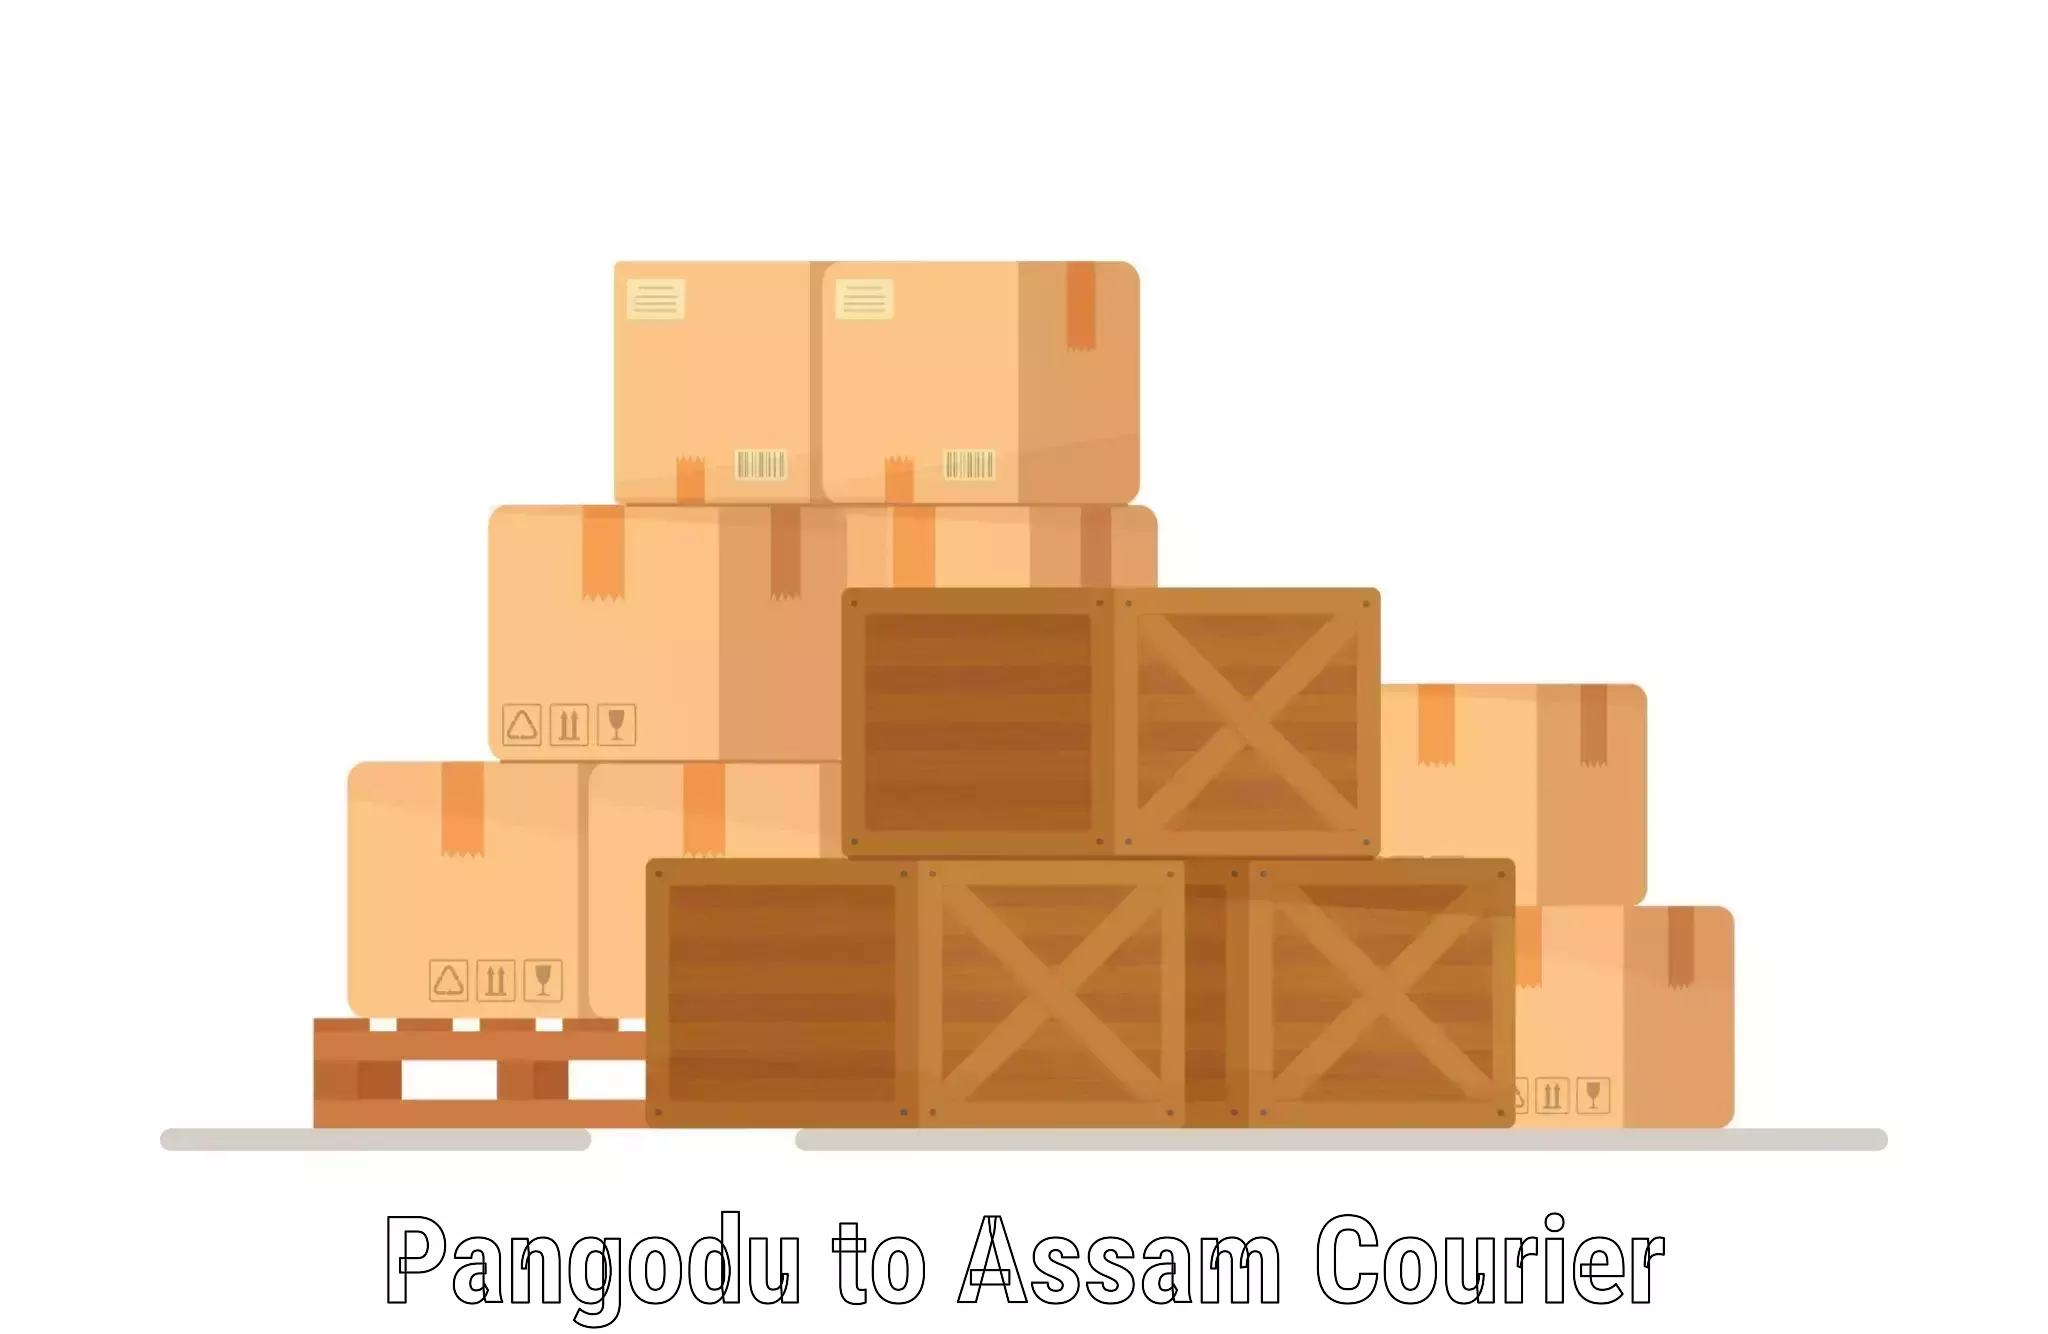 Efficient parcel tracking in Pangodu to Assam